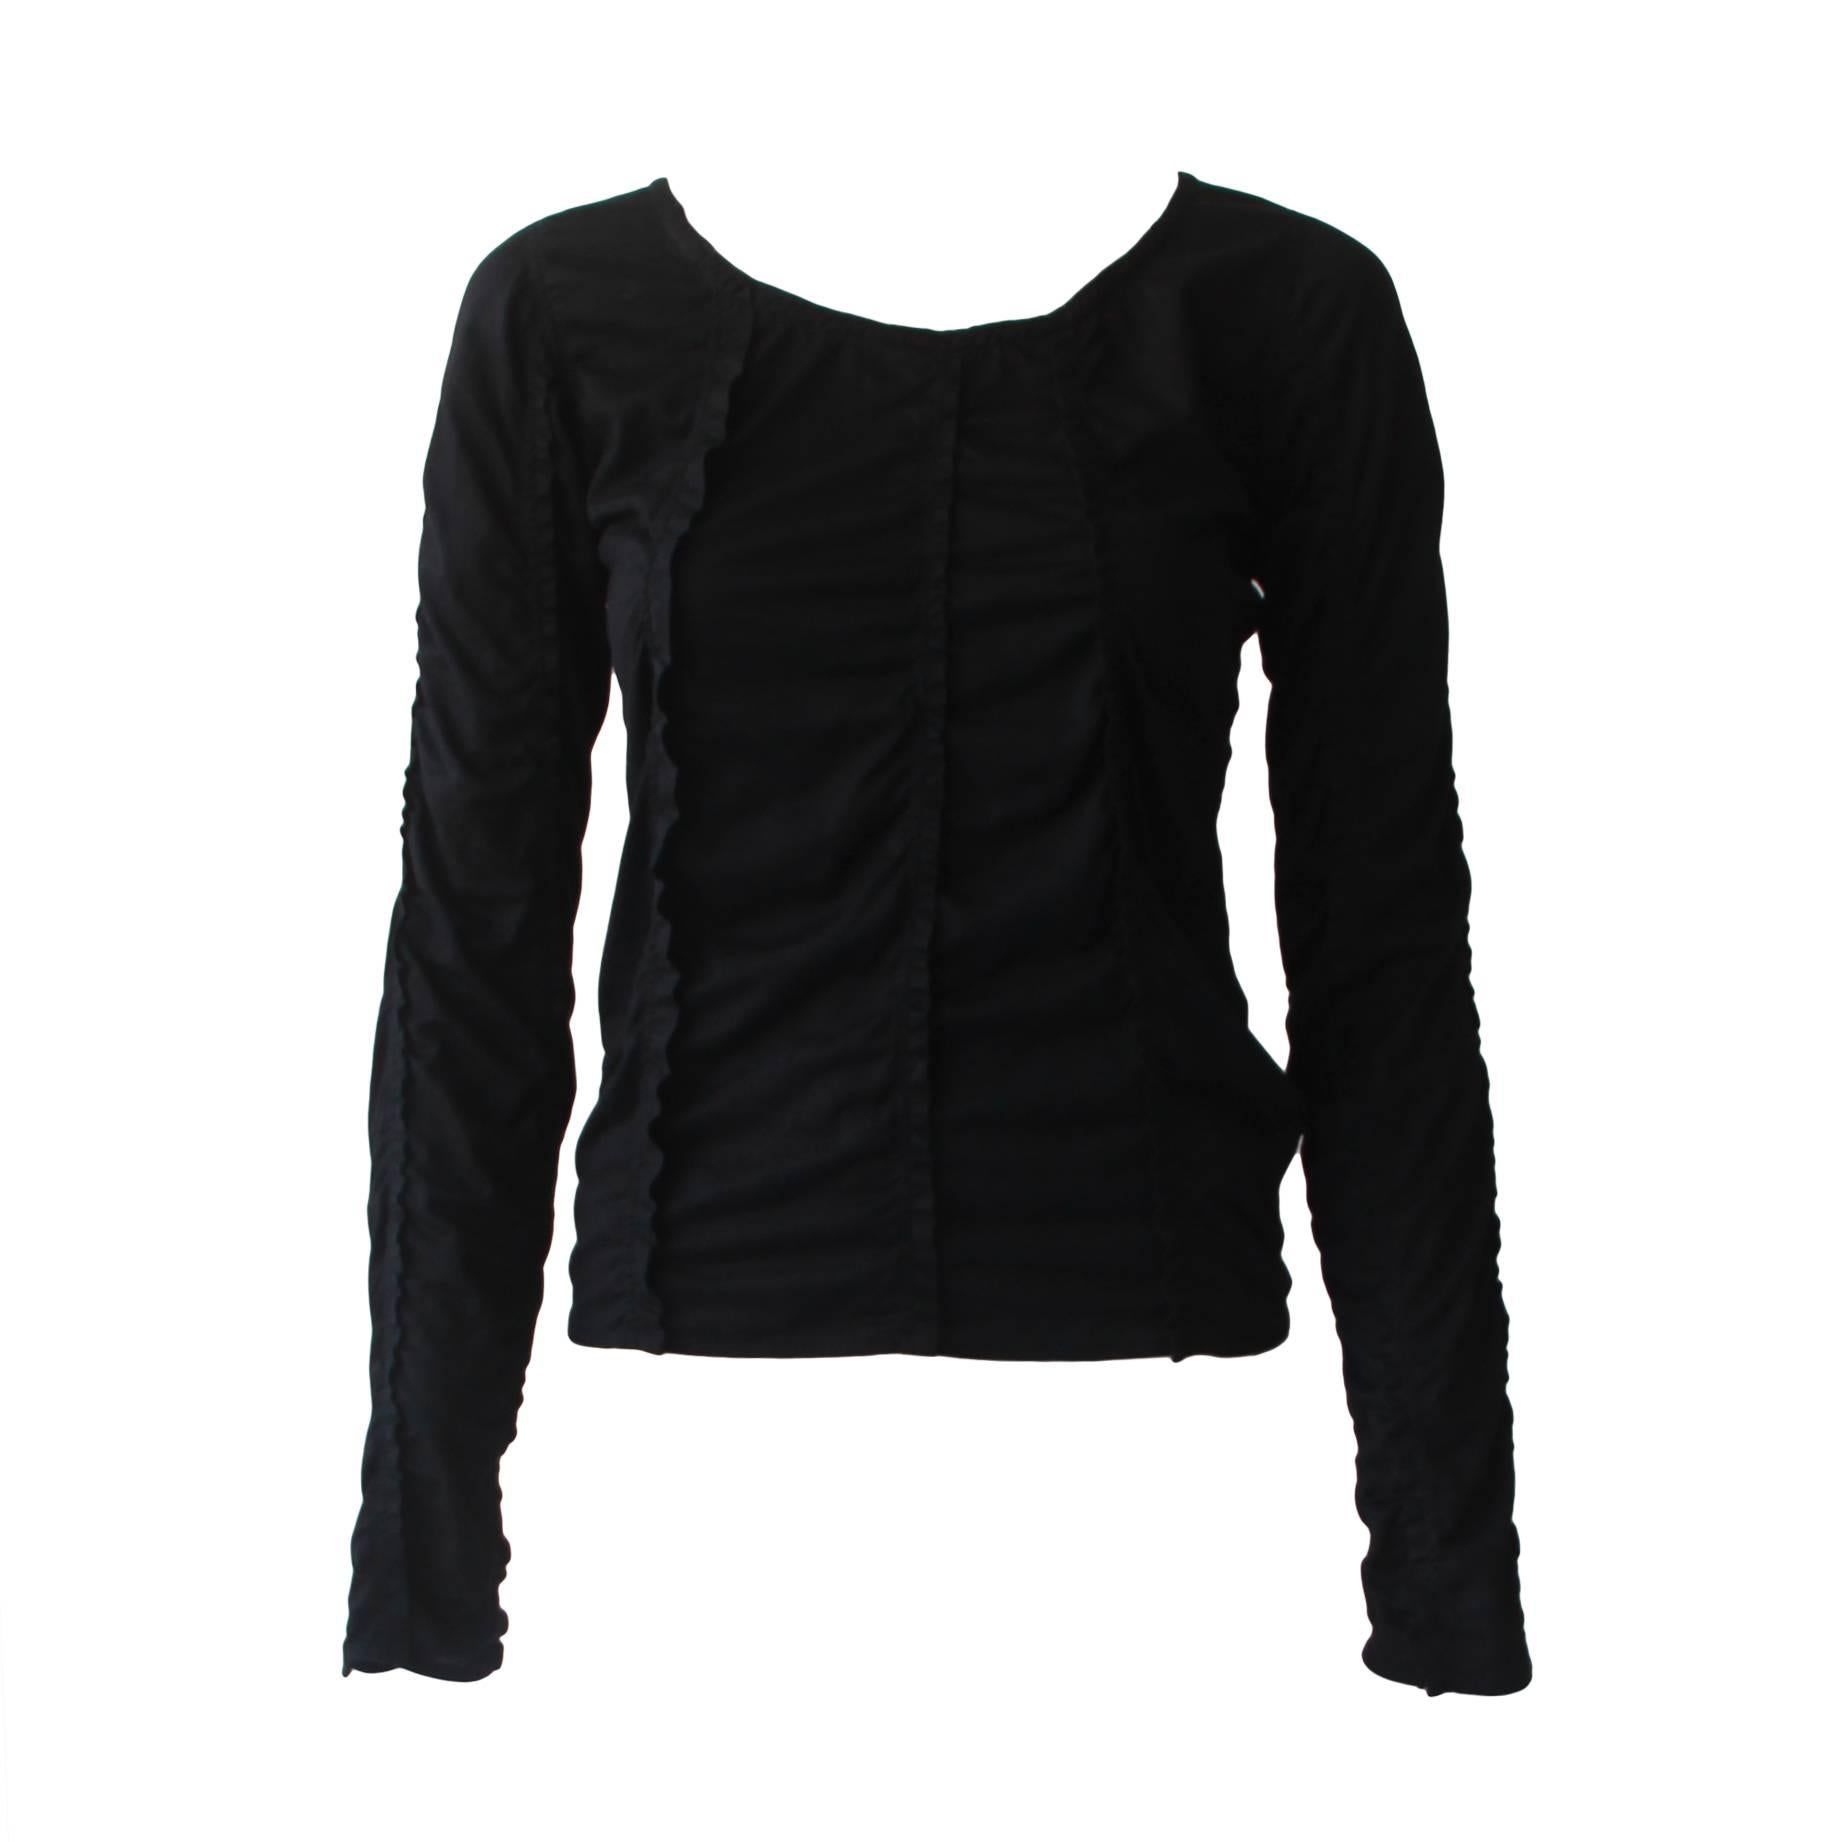 Tom Ford For Yves Saint Laurent Ribbon Top Fall 2002 For Sale